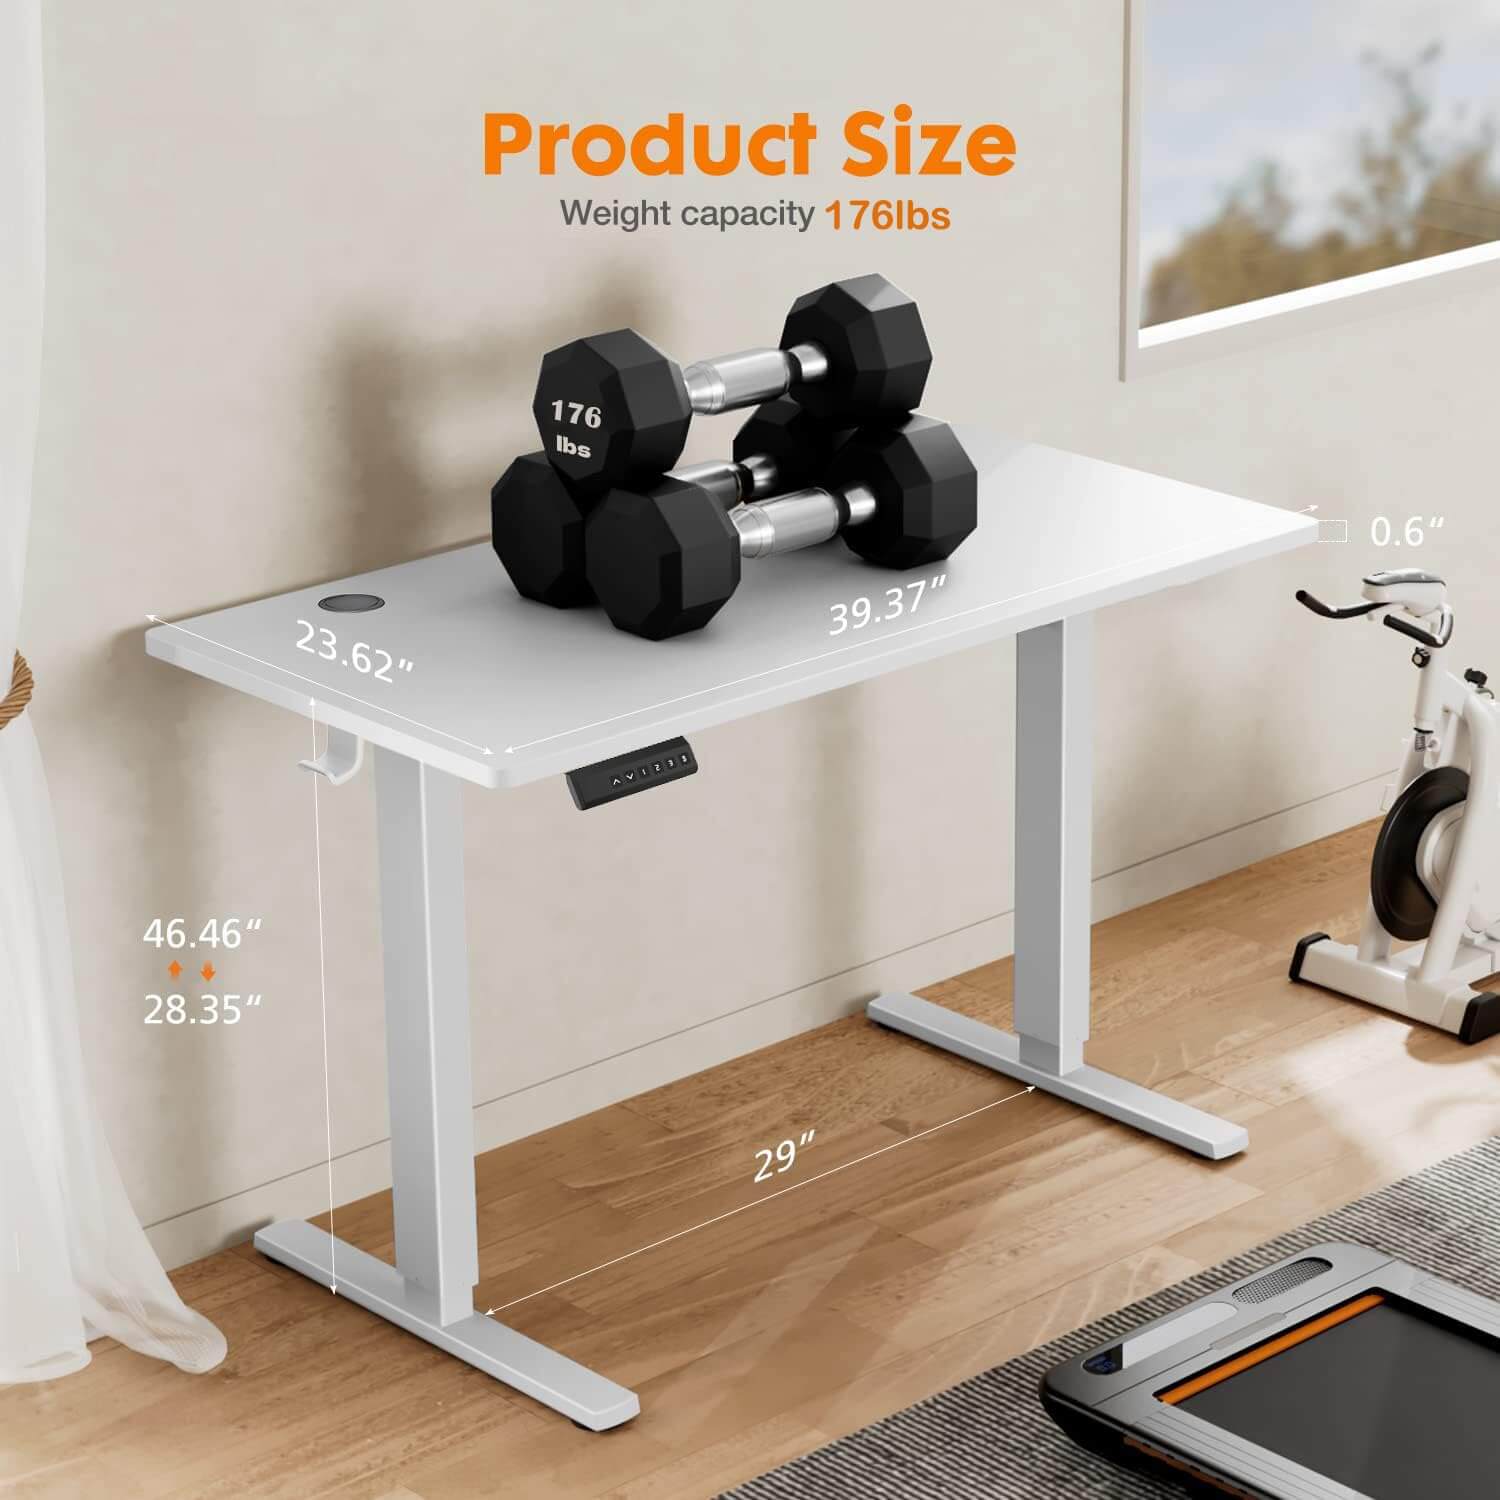 electric-adjustable-standing-desk#Color_White#Size_40'' x 24"